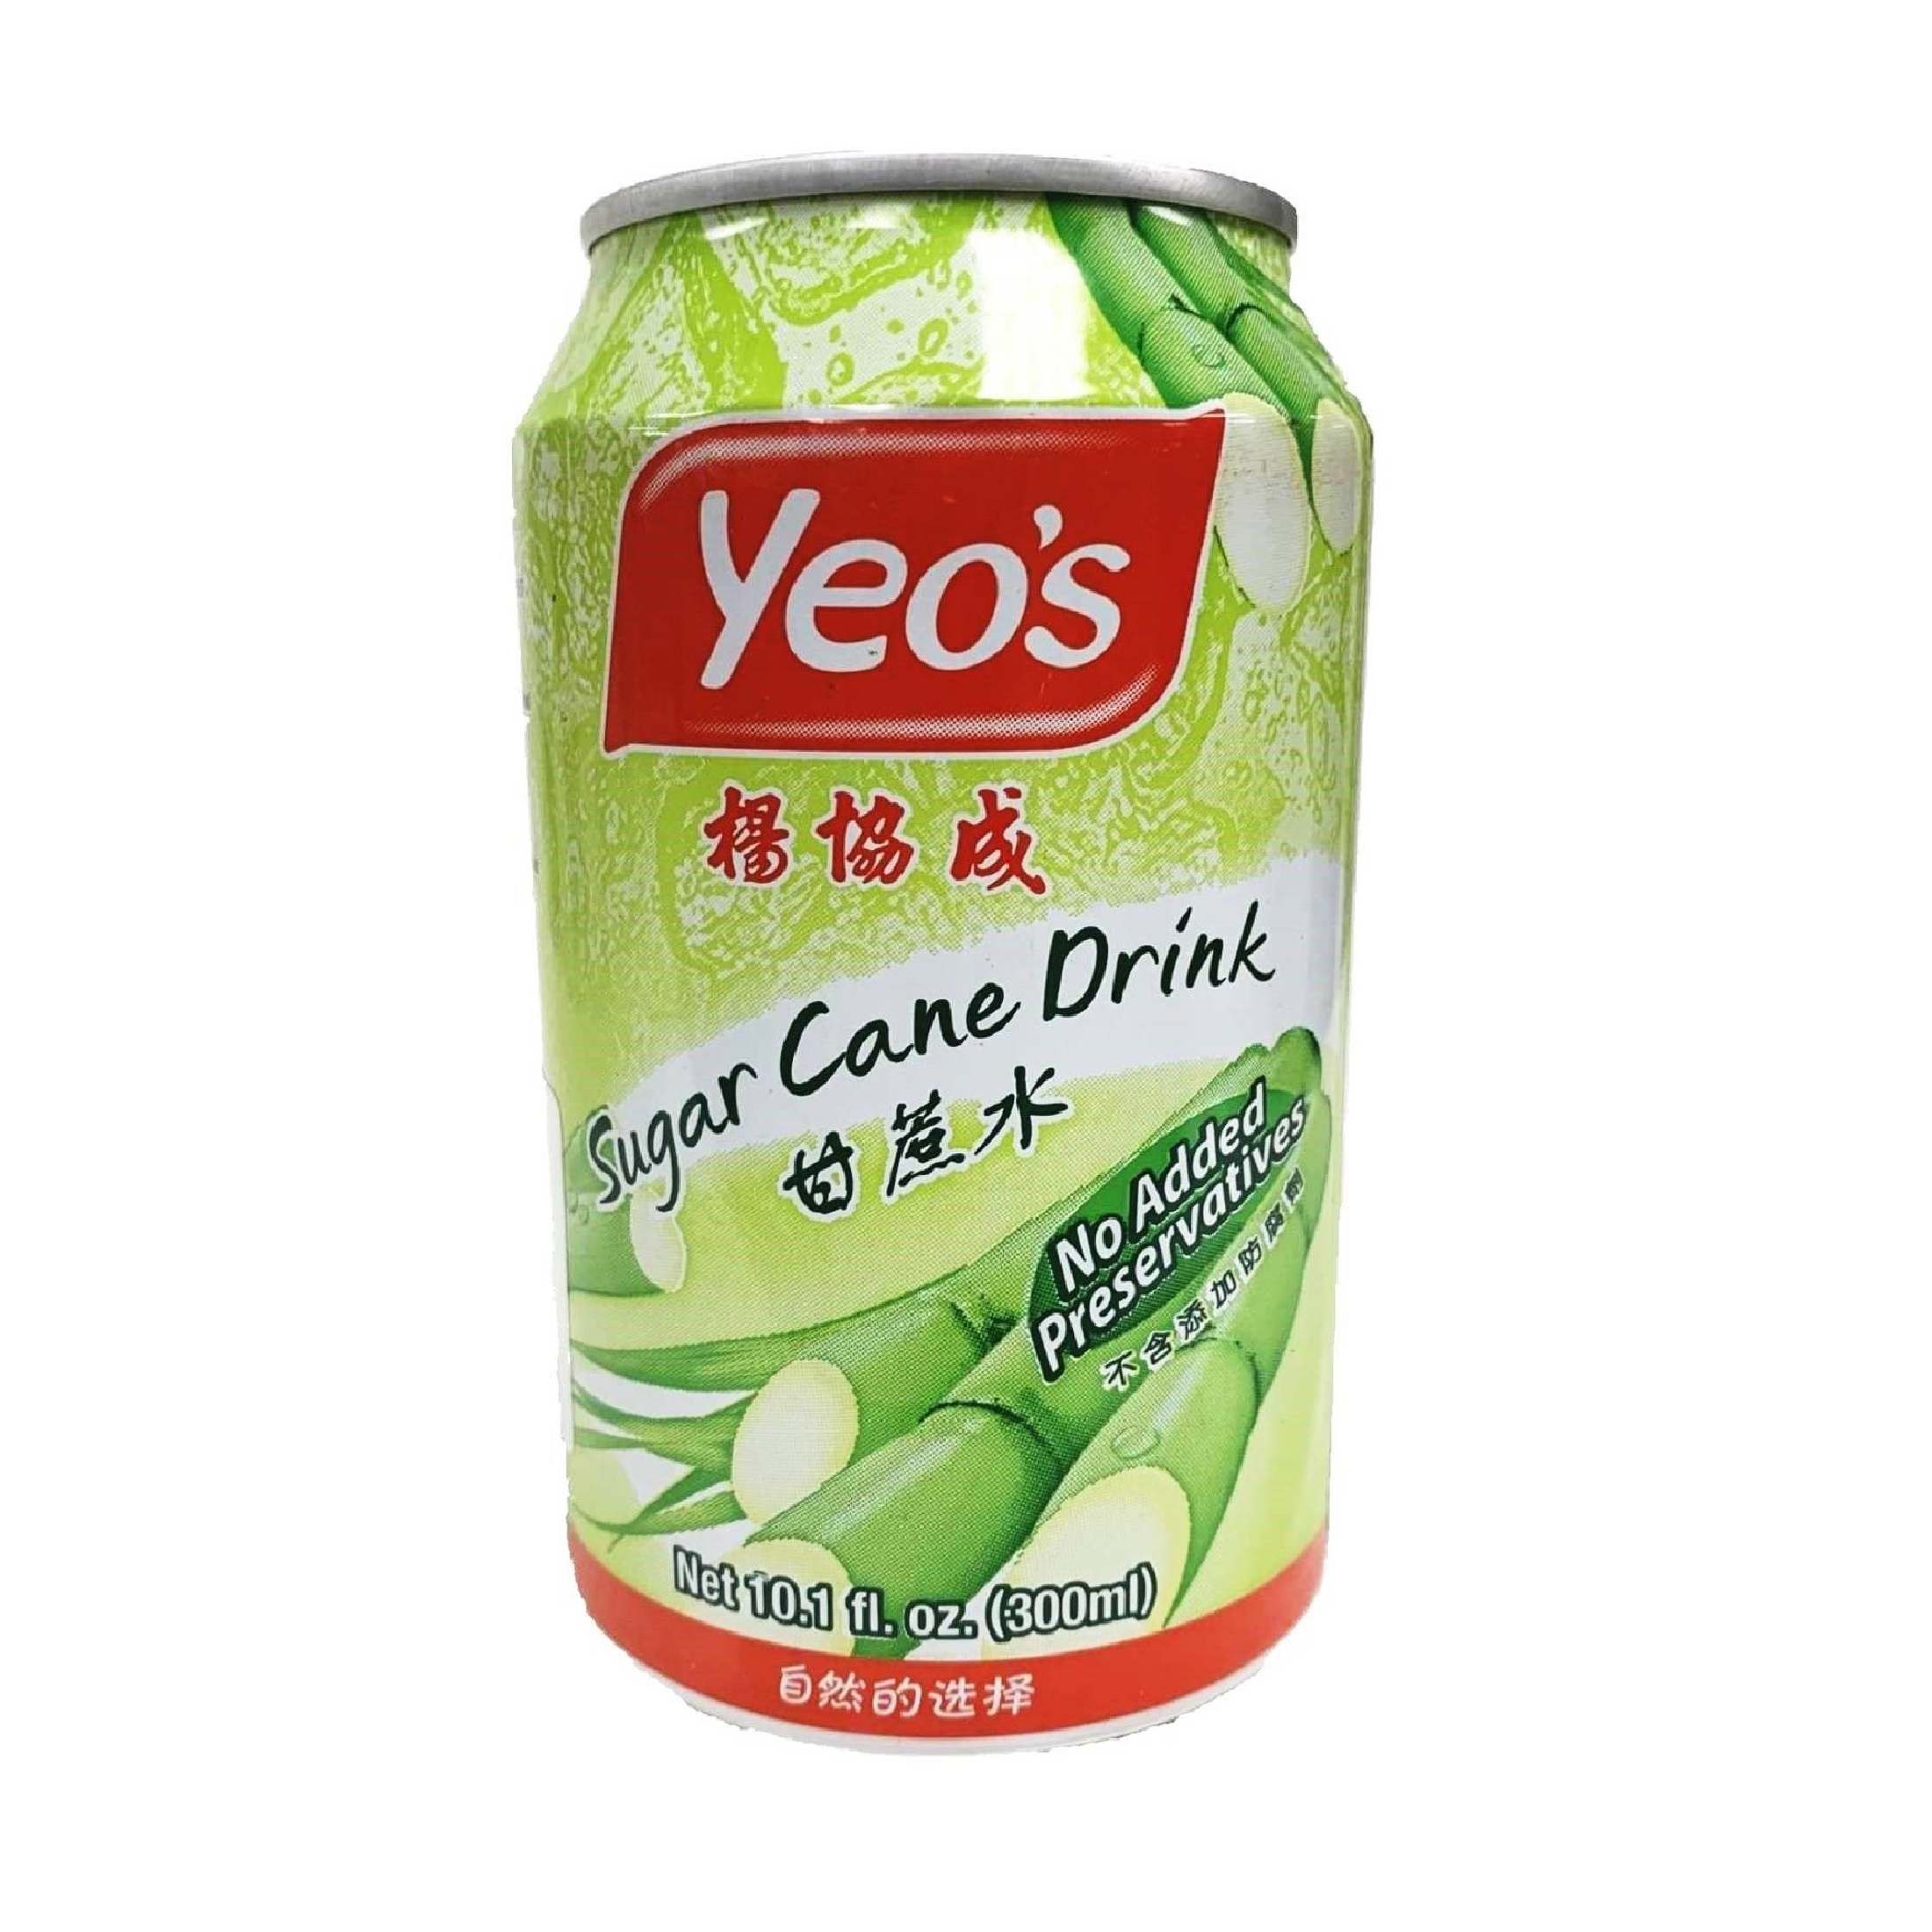 YEO'S SUGAR CANE DRINK DR310030